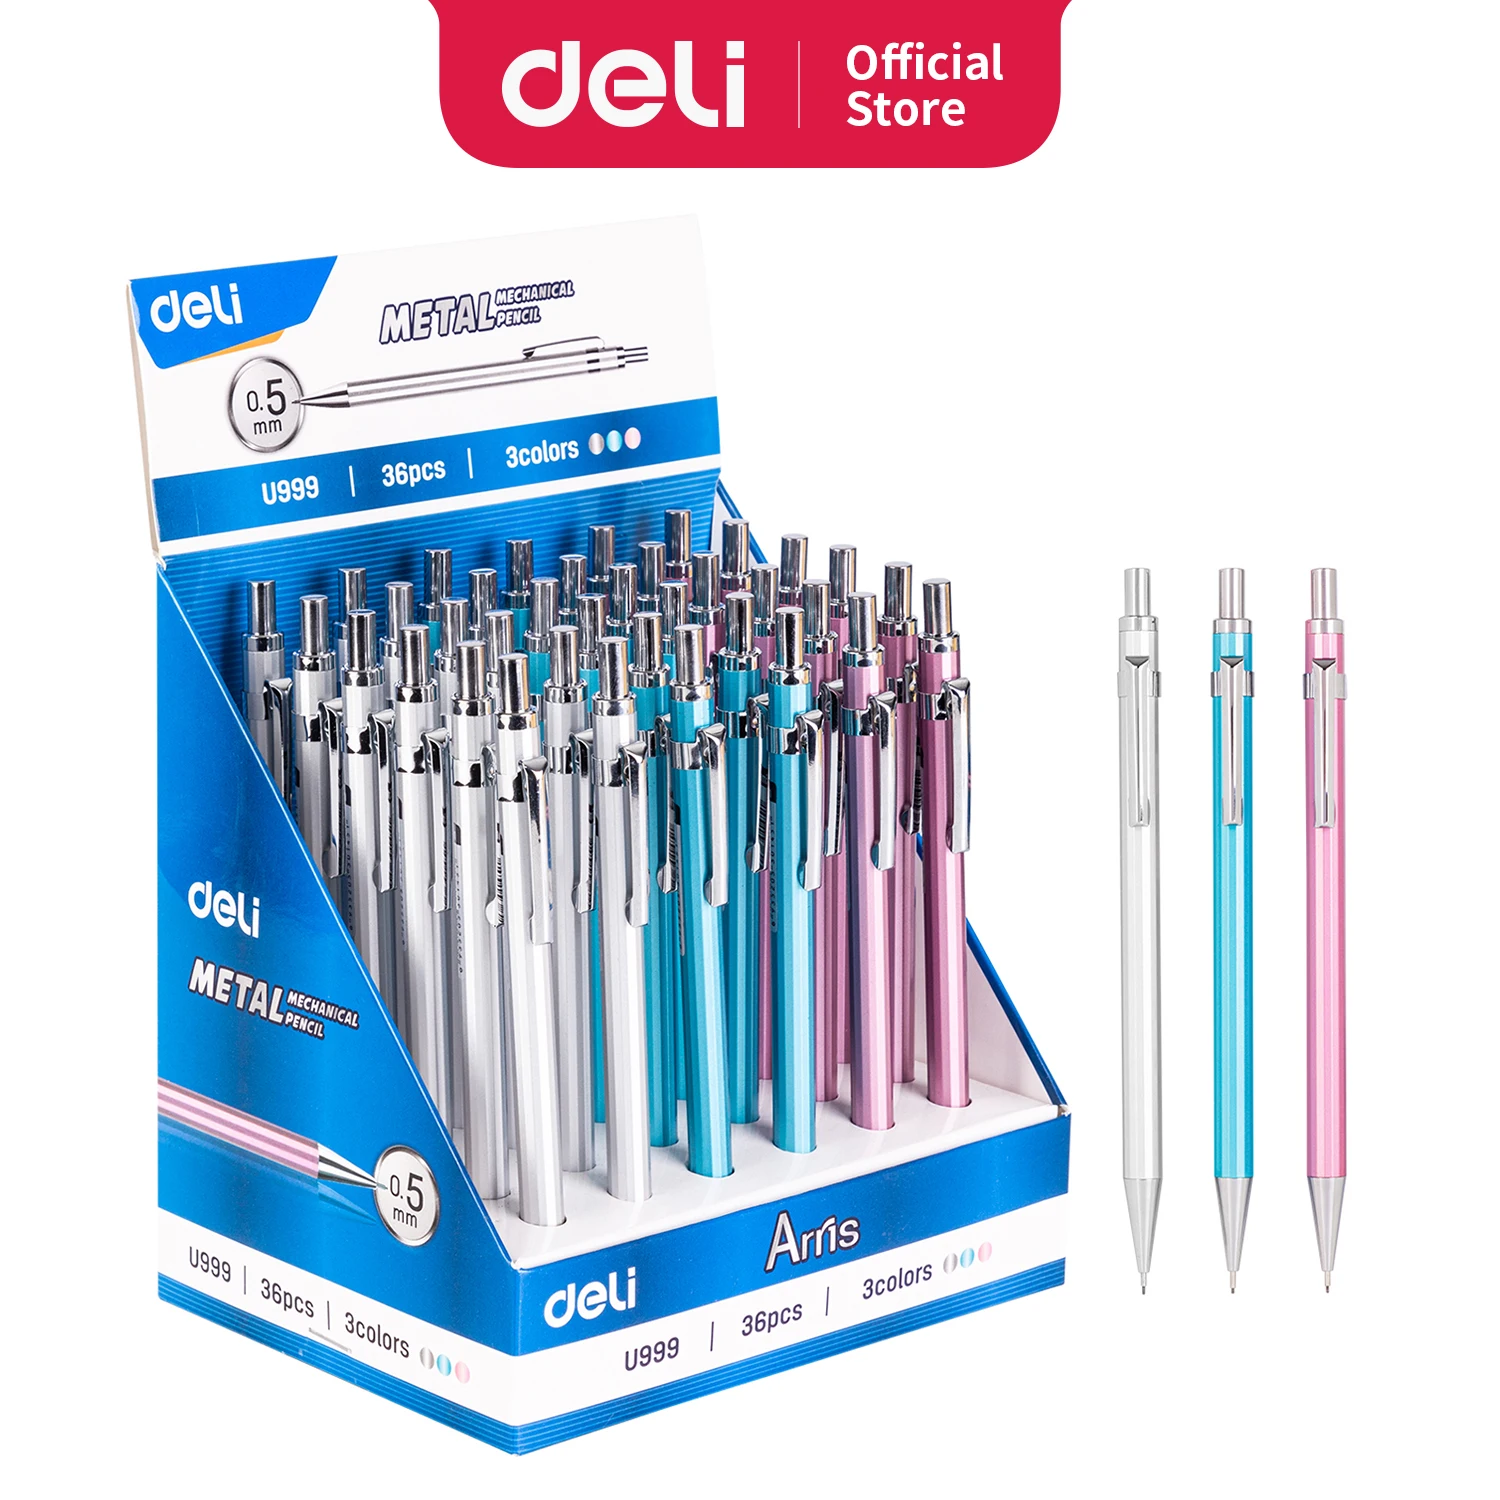 Deli Metal Mechanical Pencil 0.5mm 0.7mm with Lead Retractable Black Lead Pencils Stationery School Supplies Art Sketch Writing deli storage box multi function desktop pen holder student stationery holder with drawer desk accessories and organizer supplies